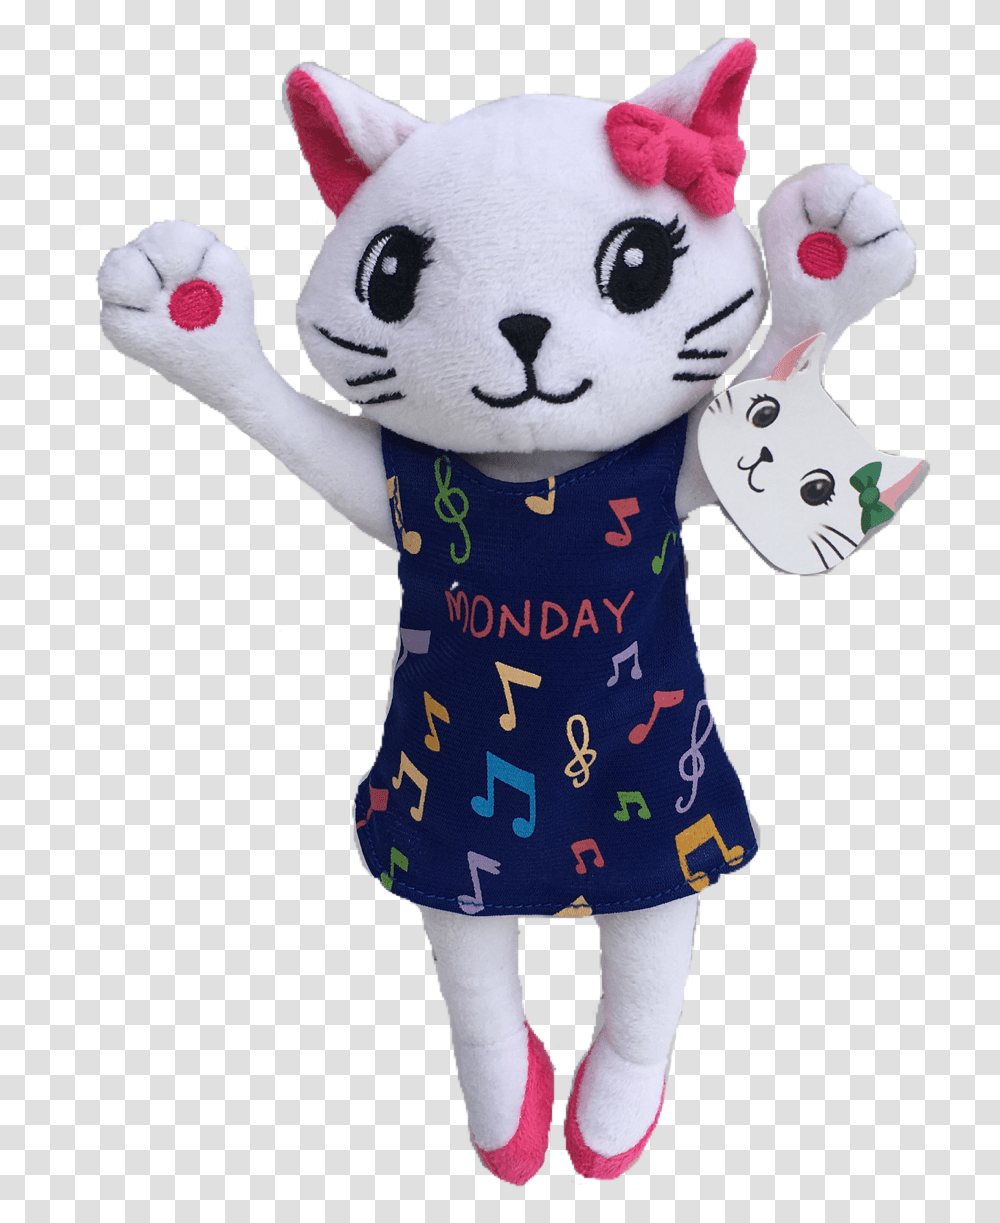 Alycat And The Monday Blues - Plush Toy Stuffed Toy, Clothing, Apparel, Mascot, Face Transparent Png